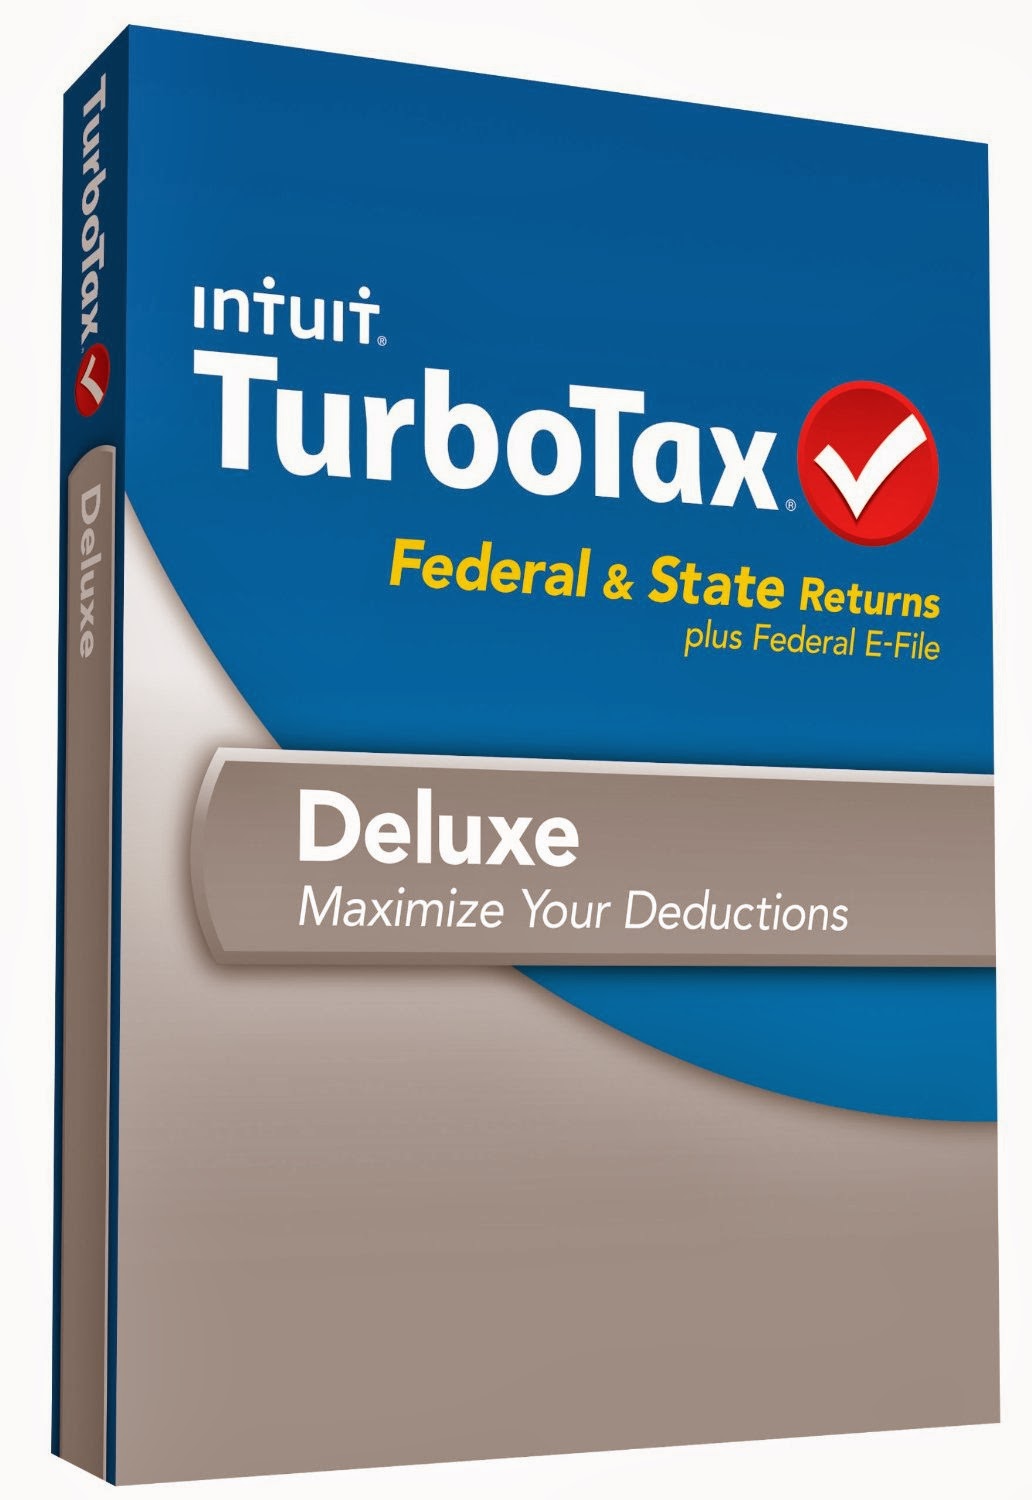 TurboTax Deluxe Fed, Efile and State 2013 with Refund Bonus Offer